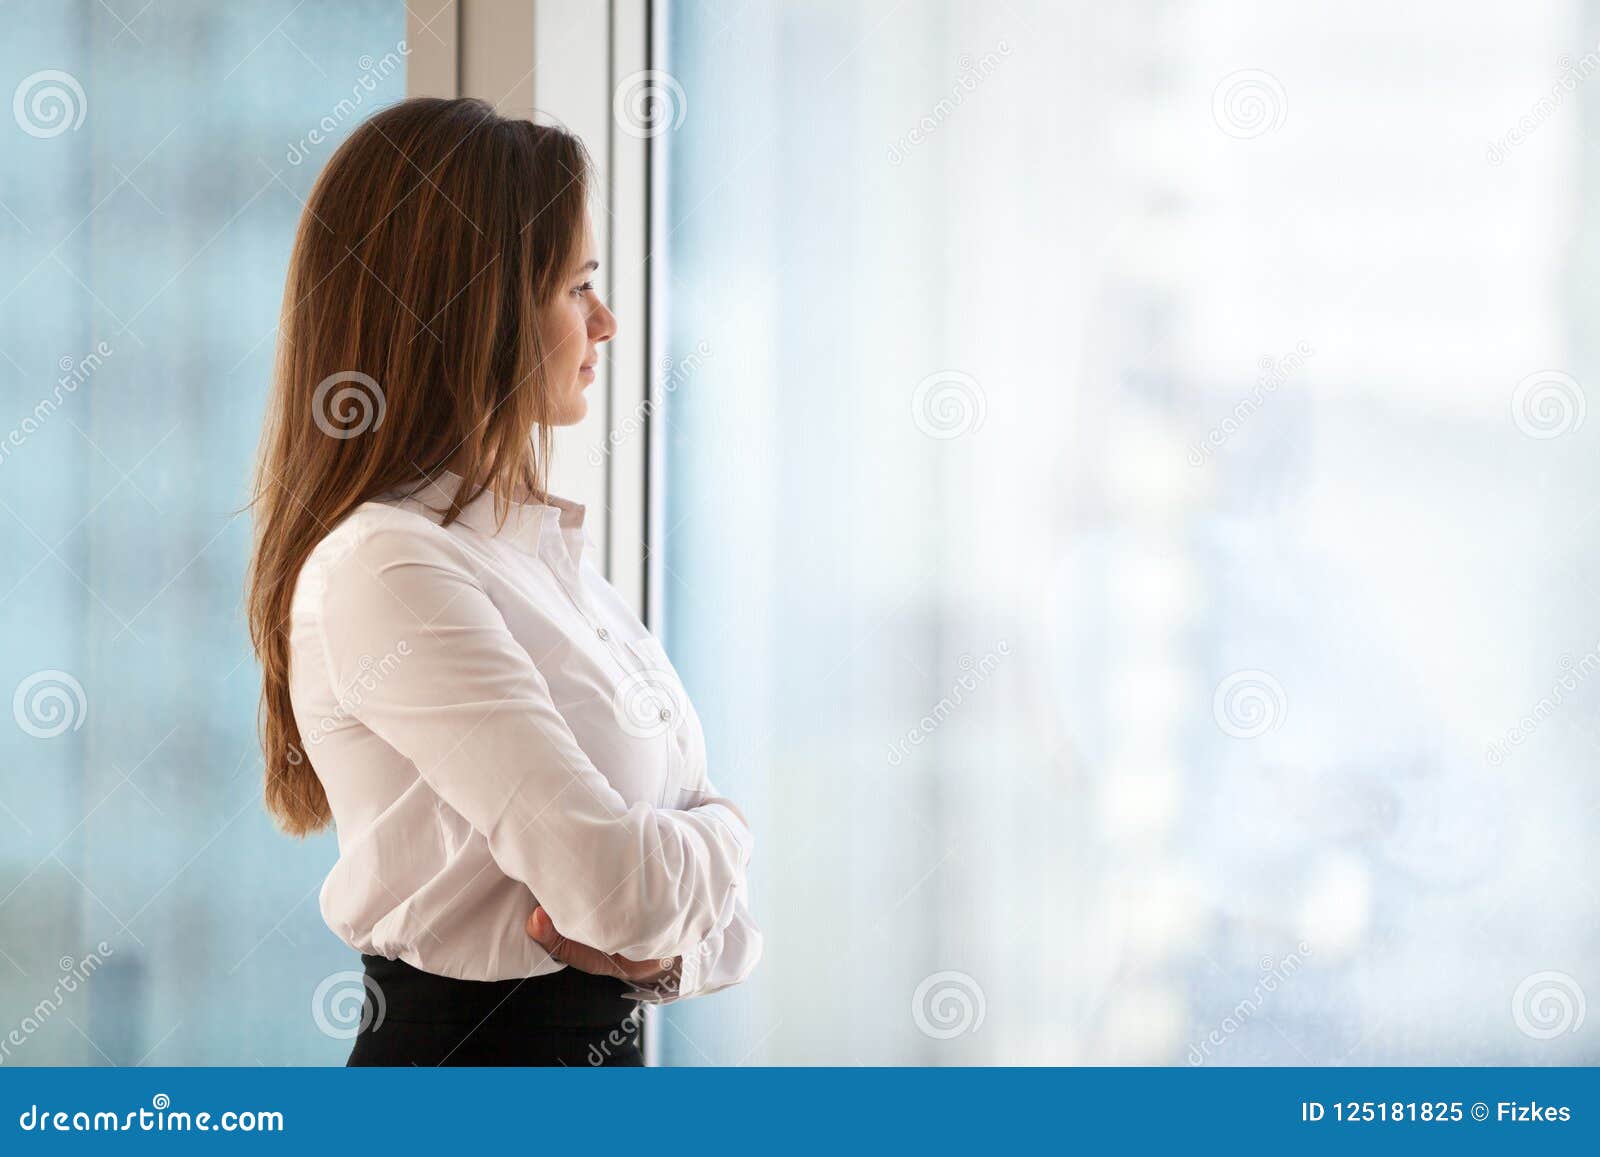 successful thoughtful woman business leader looking out of big w